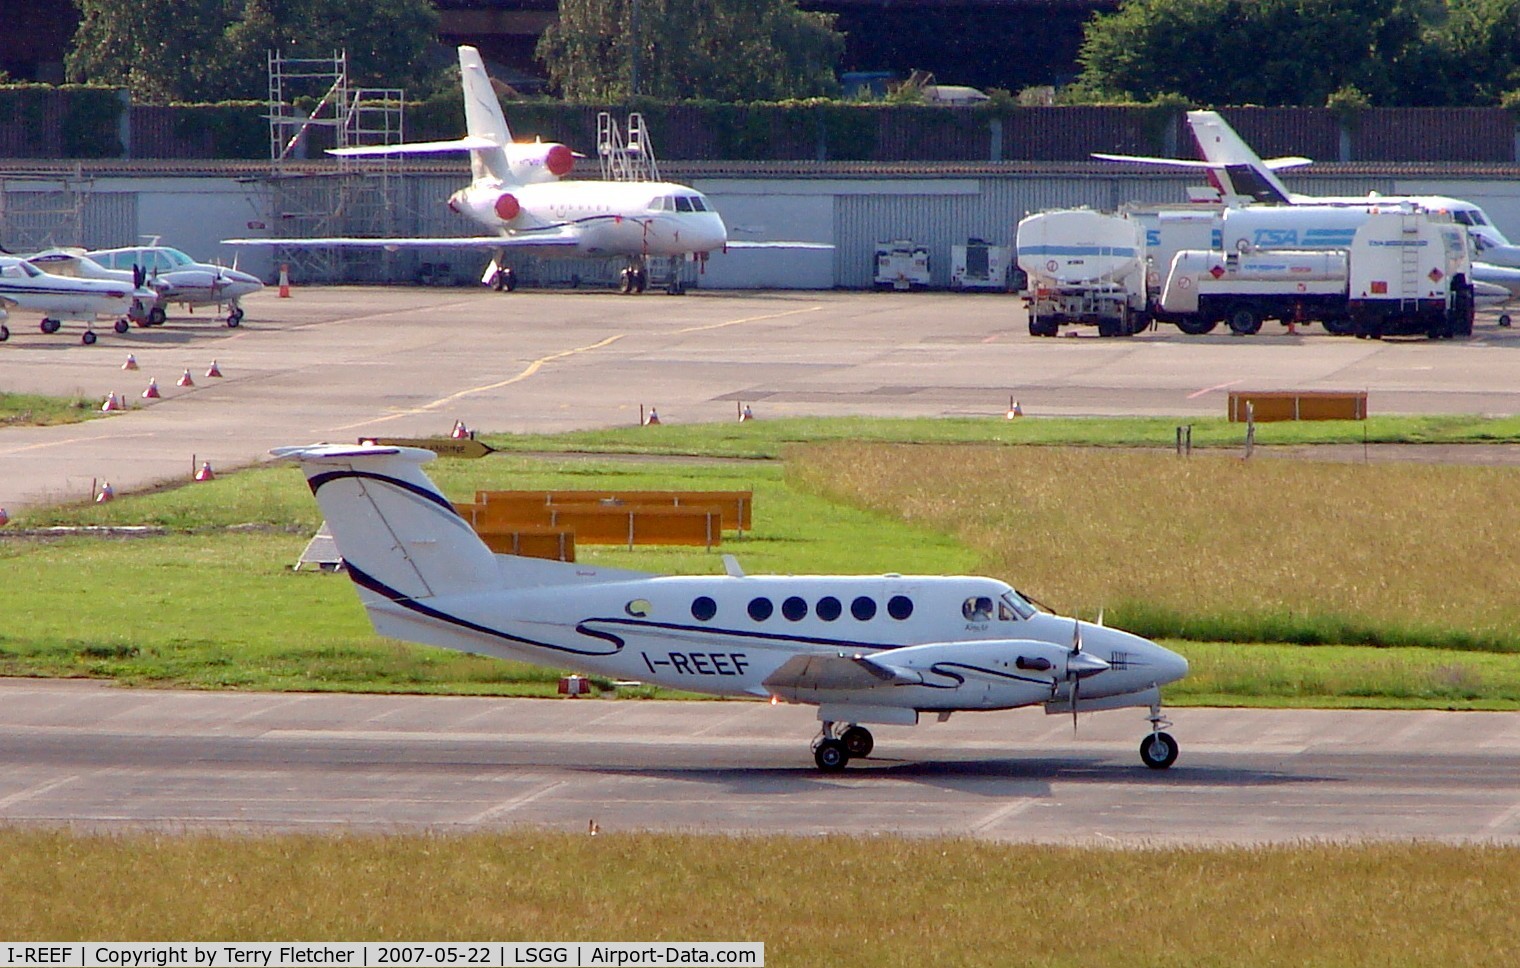 I-REEF, 2005 Raytheon B200 King Air C/N BB-1905, at Geneva on the day of EBACE2007 exhibition